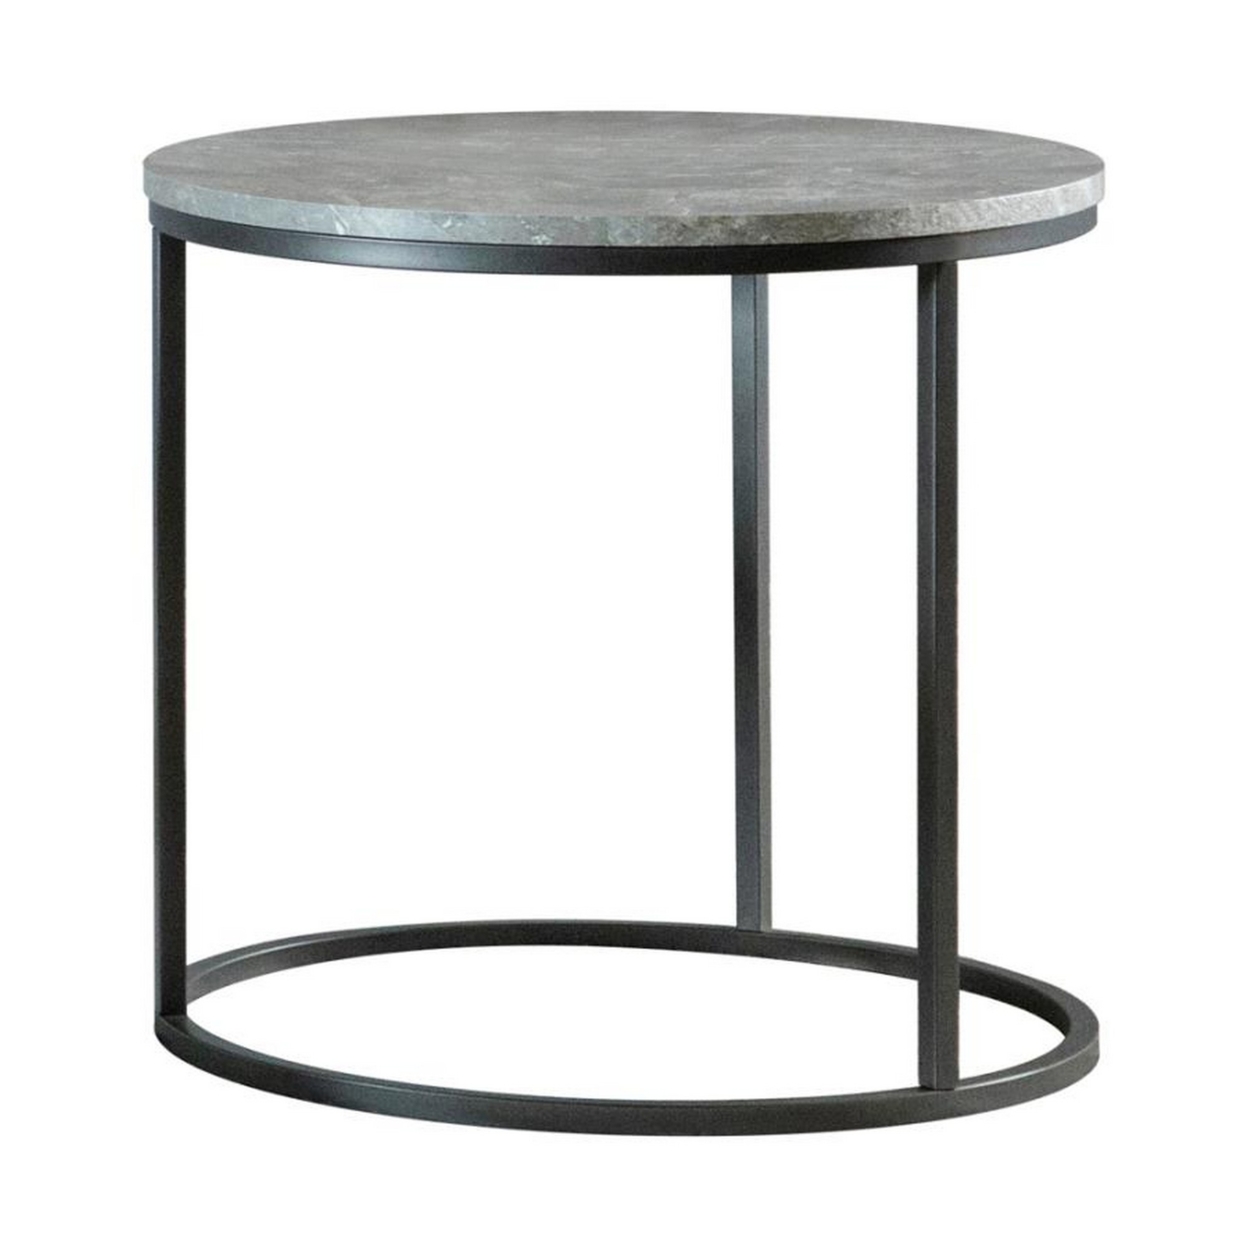 End Table With Textured Round Faux Marble Top, Gray- Saltoro Sherpi